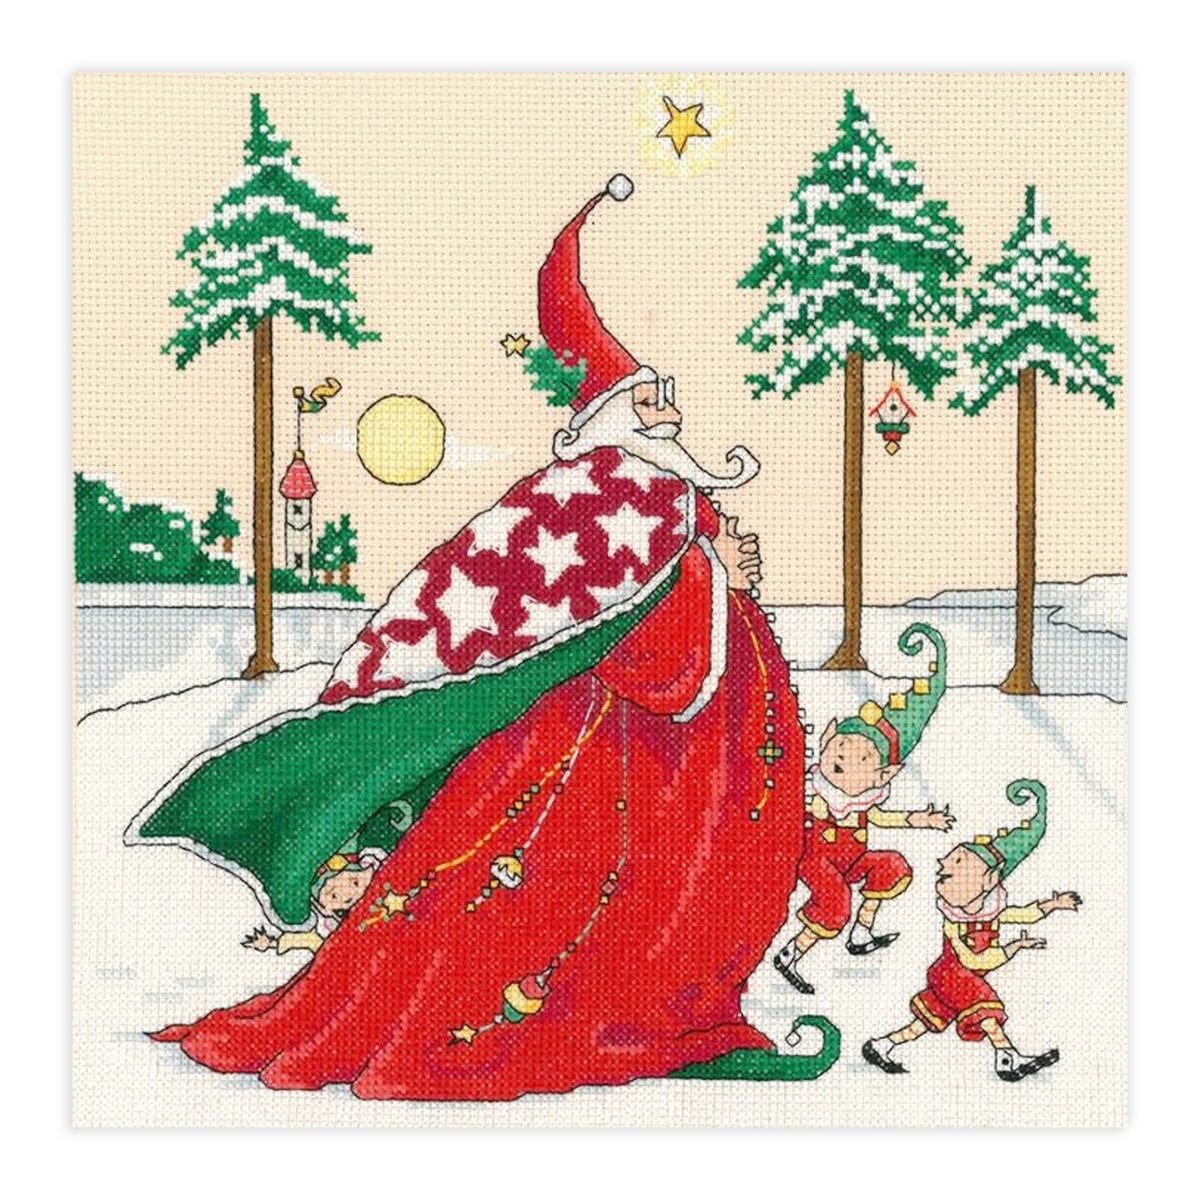 Christmas Wizard Counted Cross Stitch Leaflet